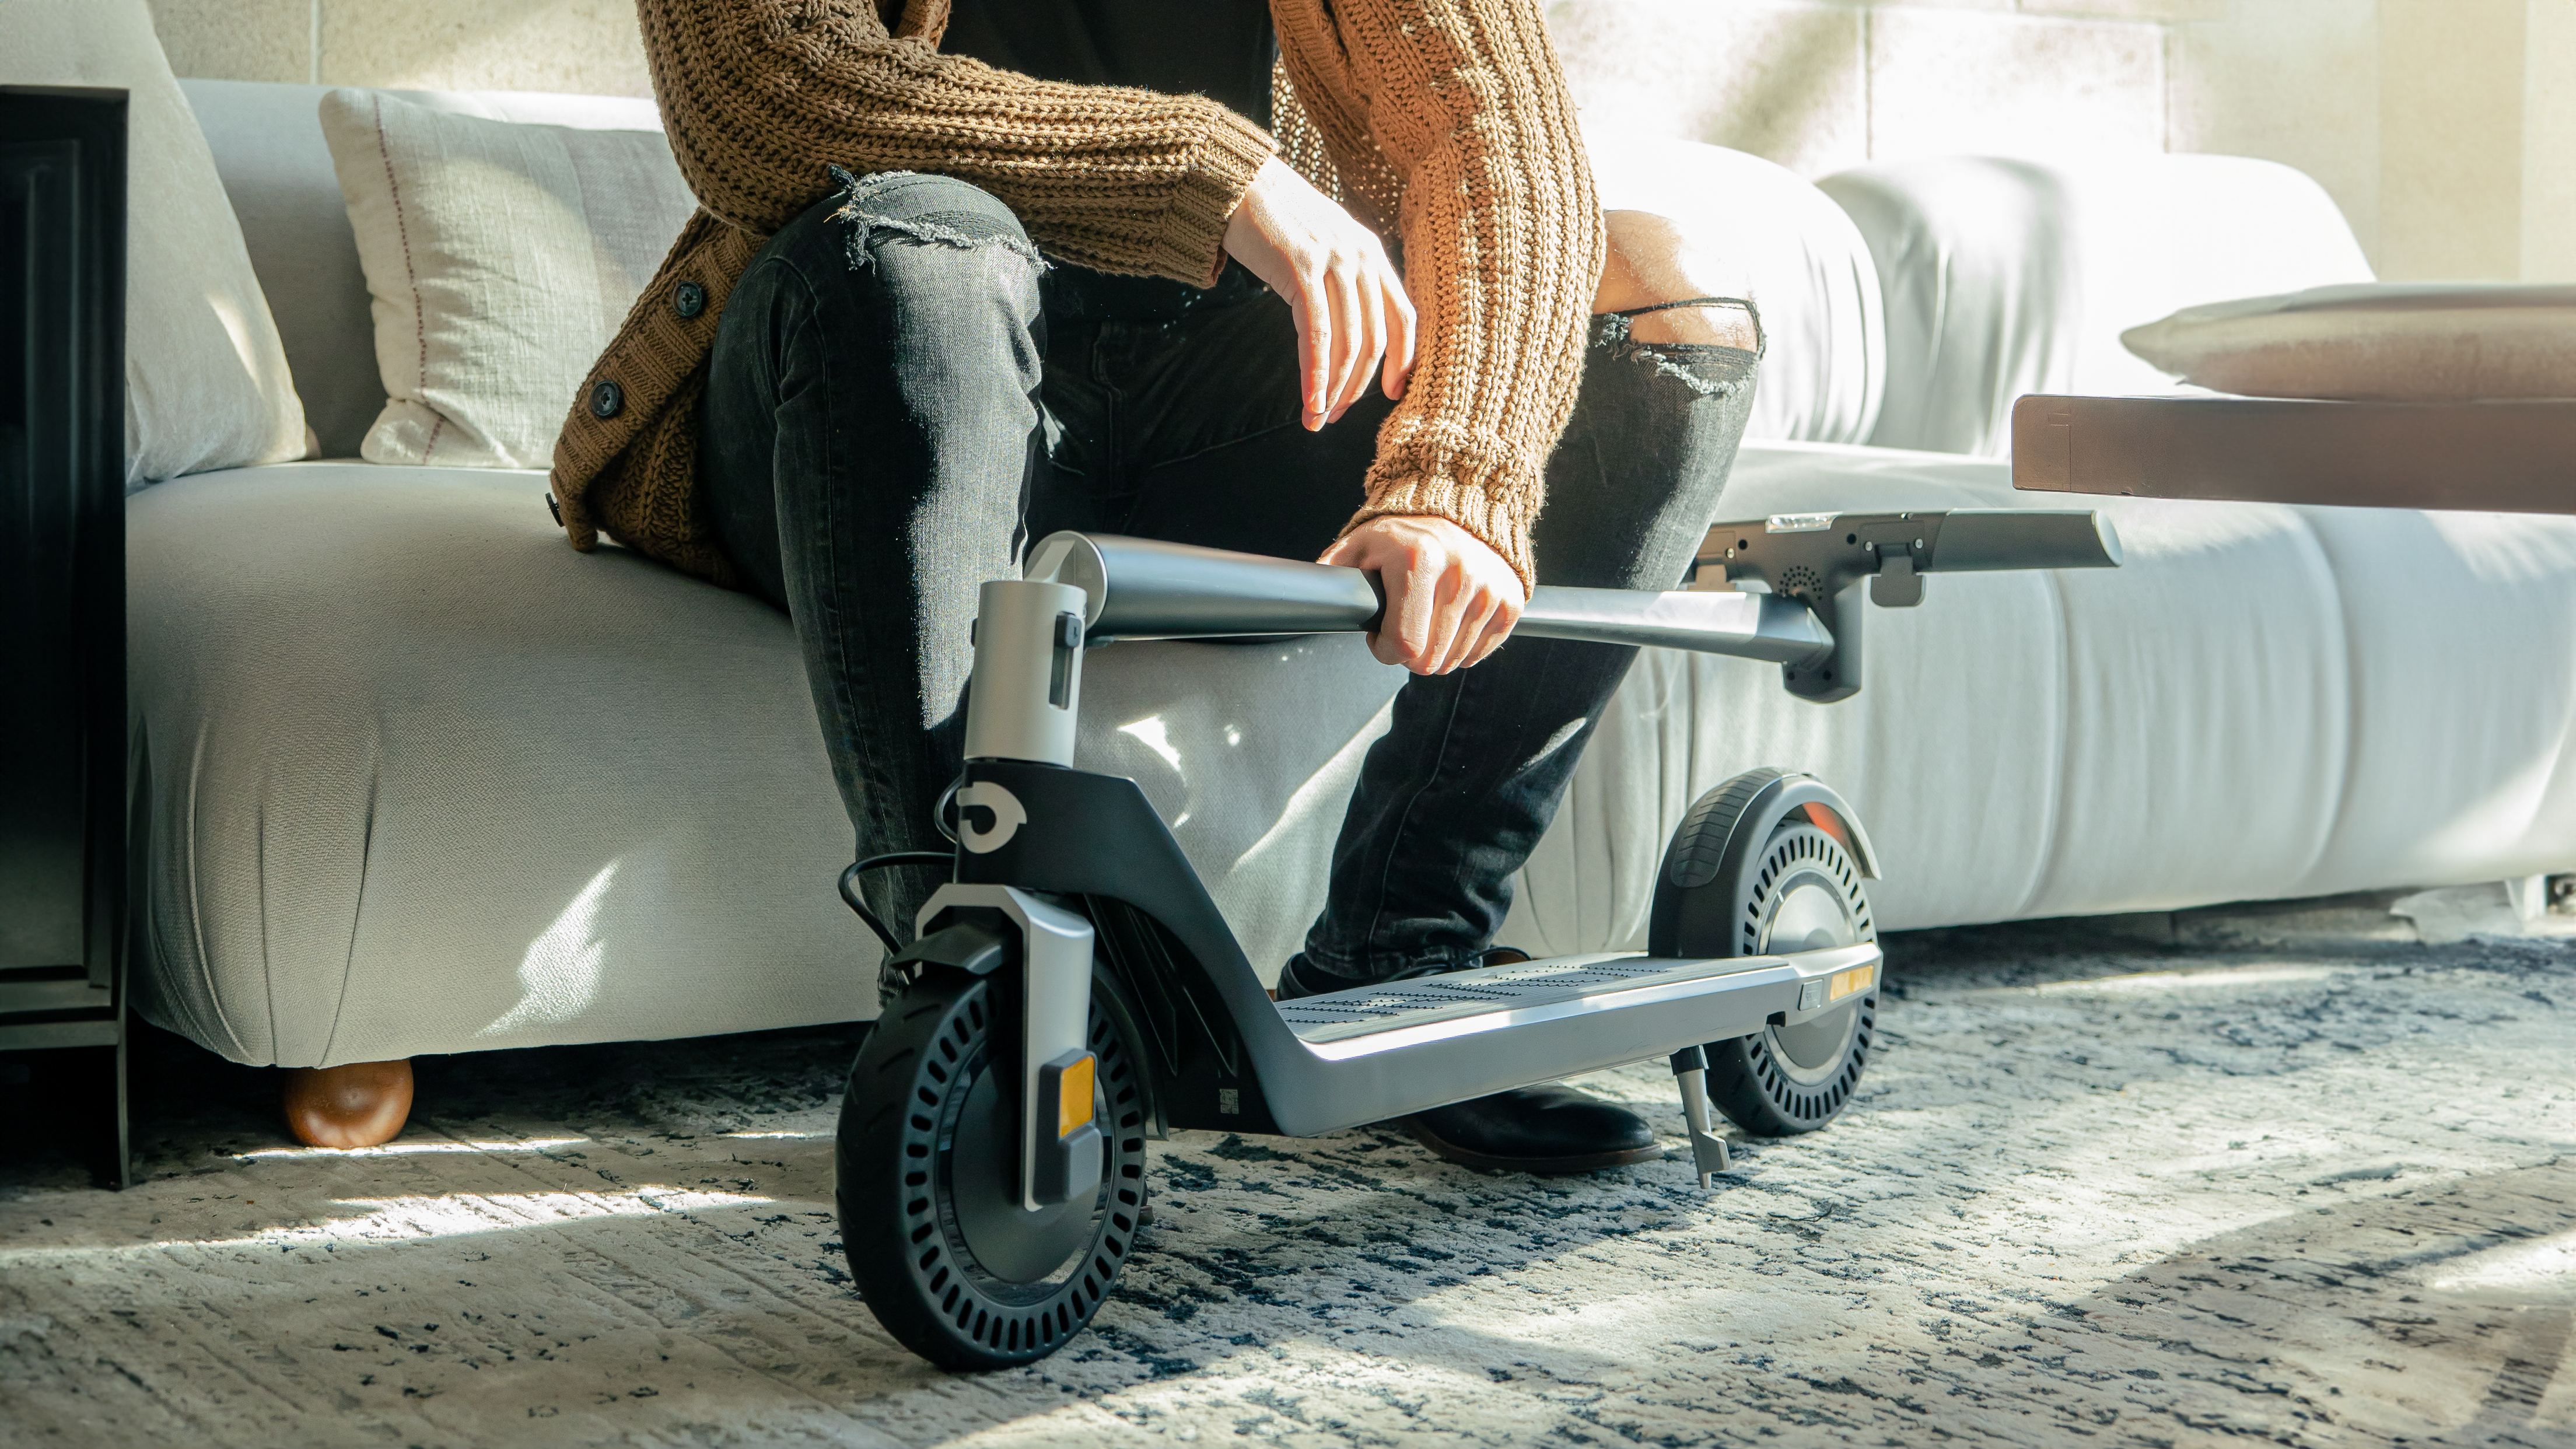 Unagi Voyager: The best lightweight electric scooter overall